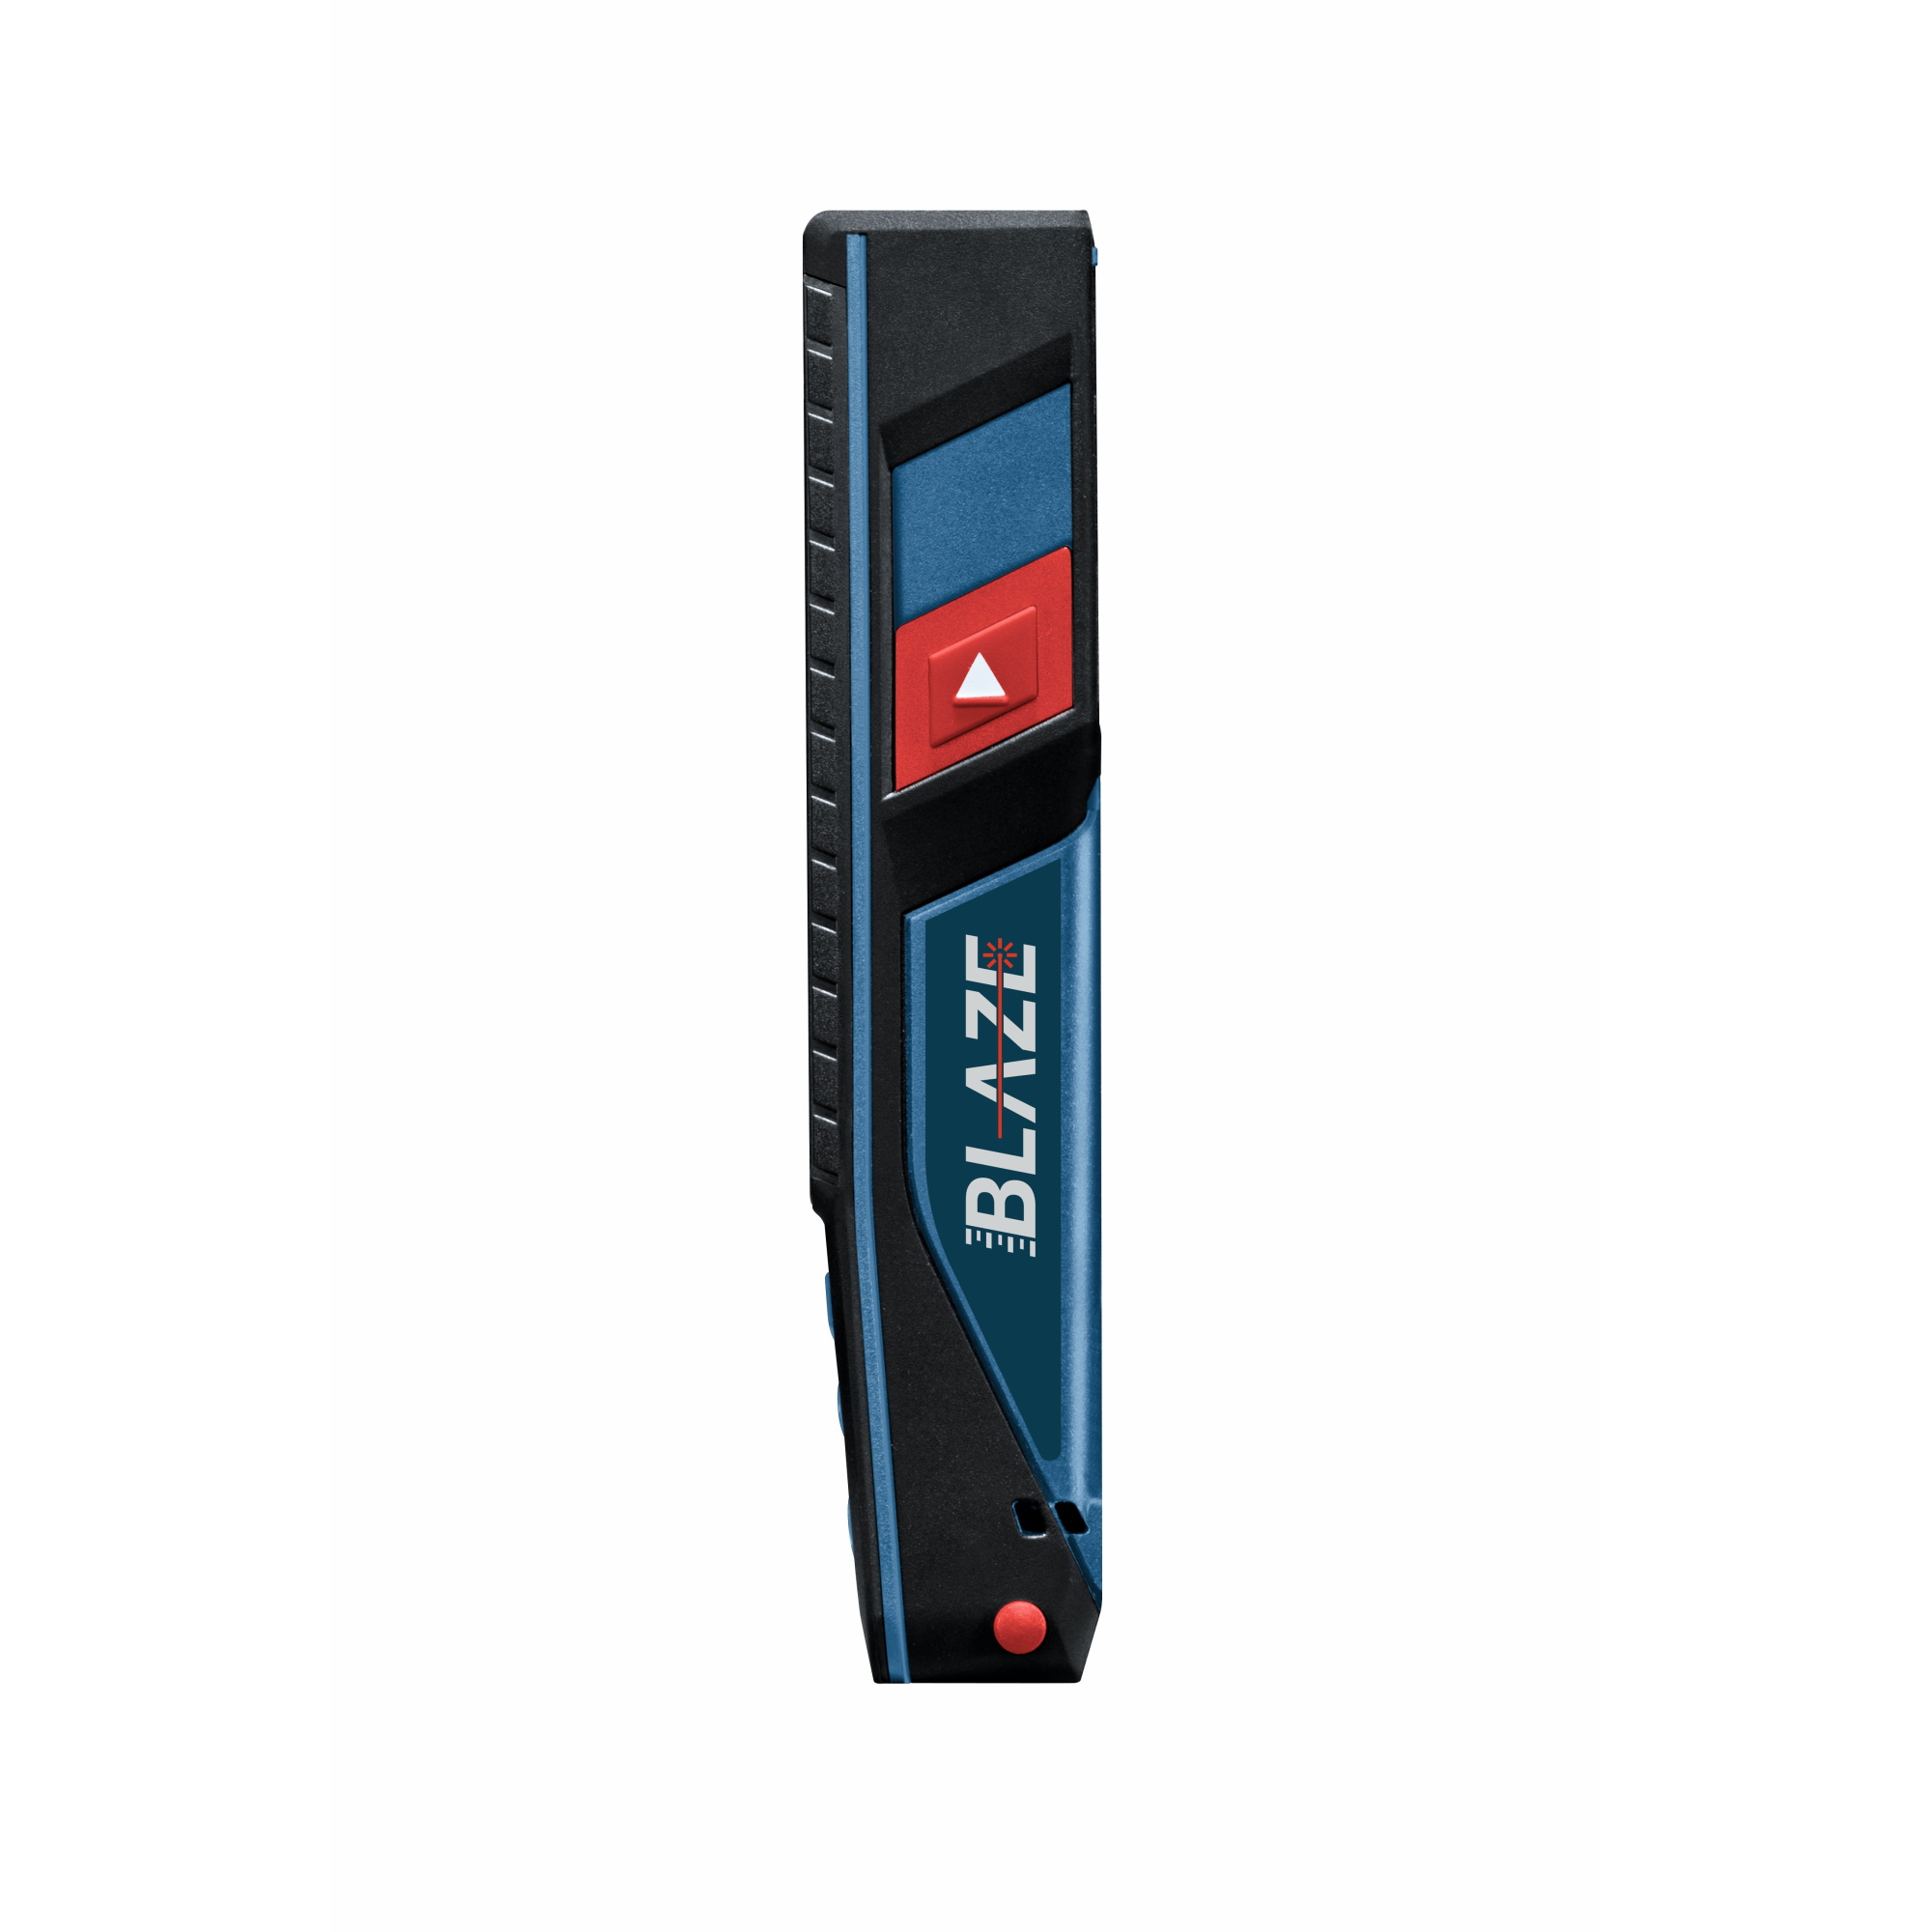 Bosch GLM400CL - Blaze Outdoor 400 ft. Connected Laser Measure with Camera Viewfinder